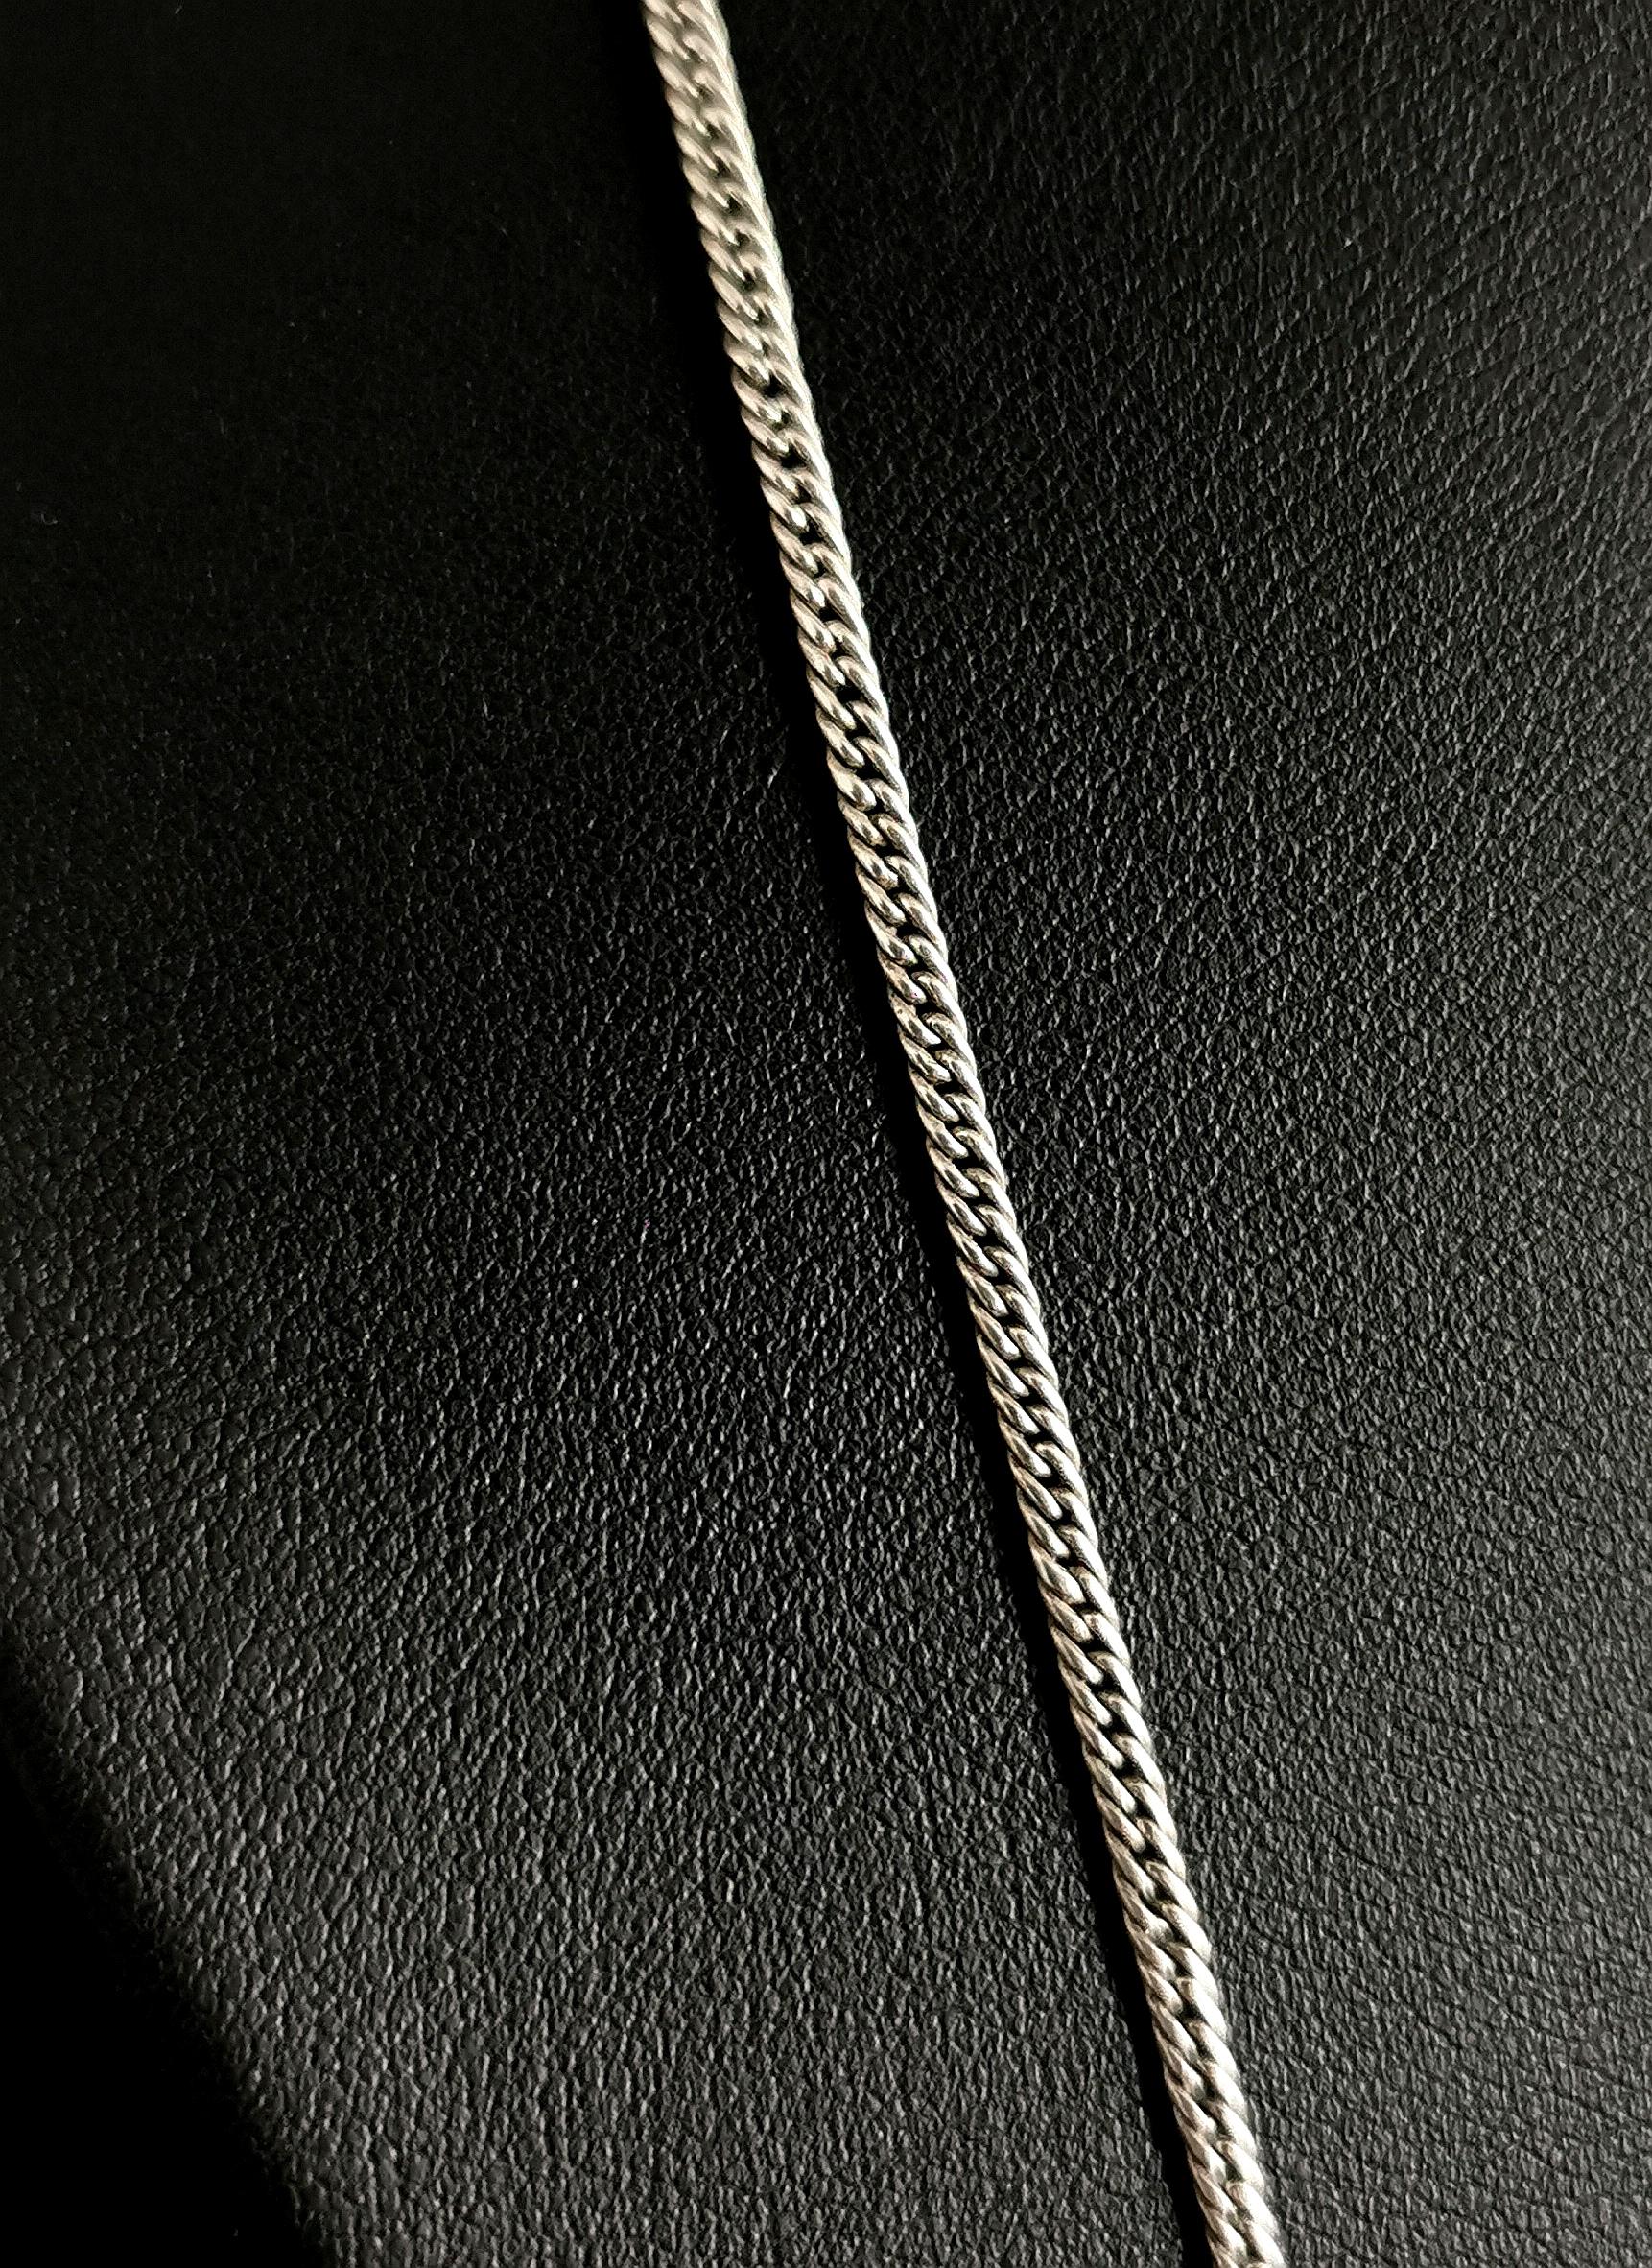 Antique Sterling Silver Longuard Chain Necklace, Muff Chain, Edwardian 3